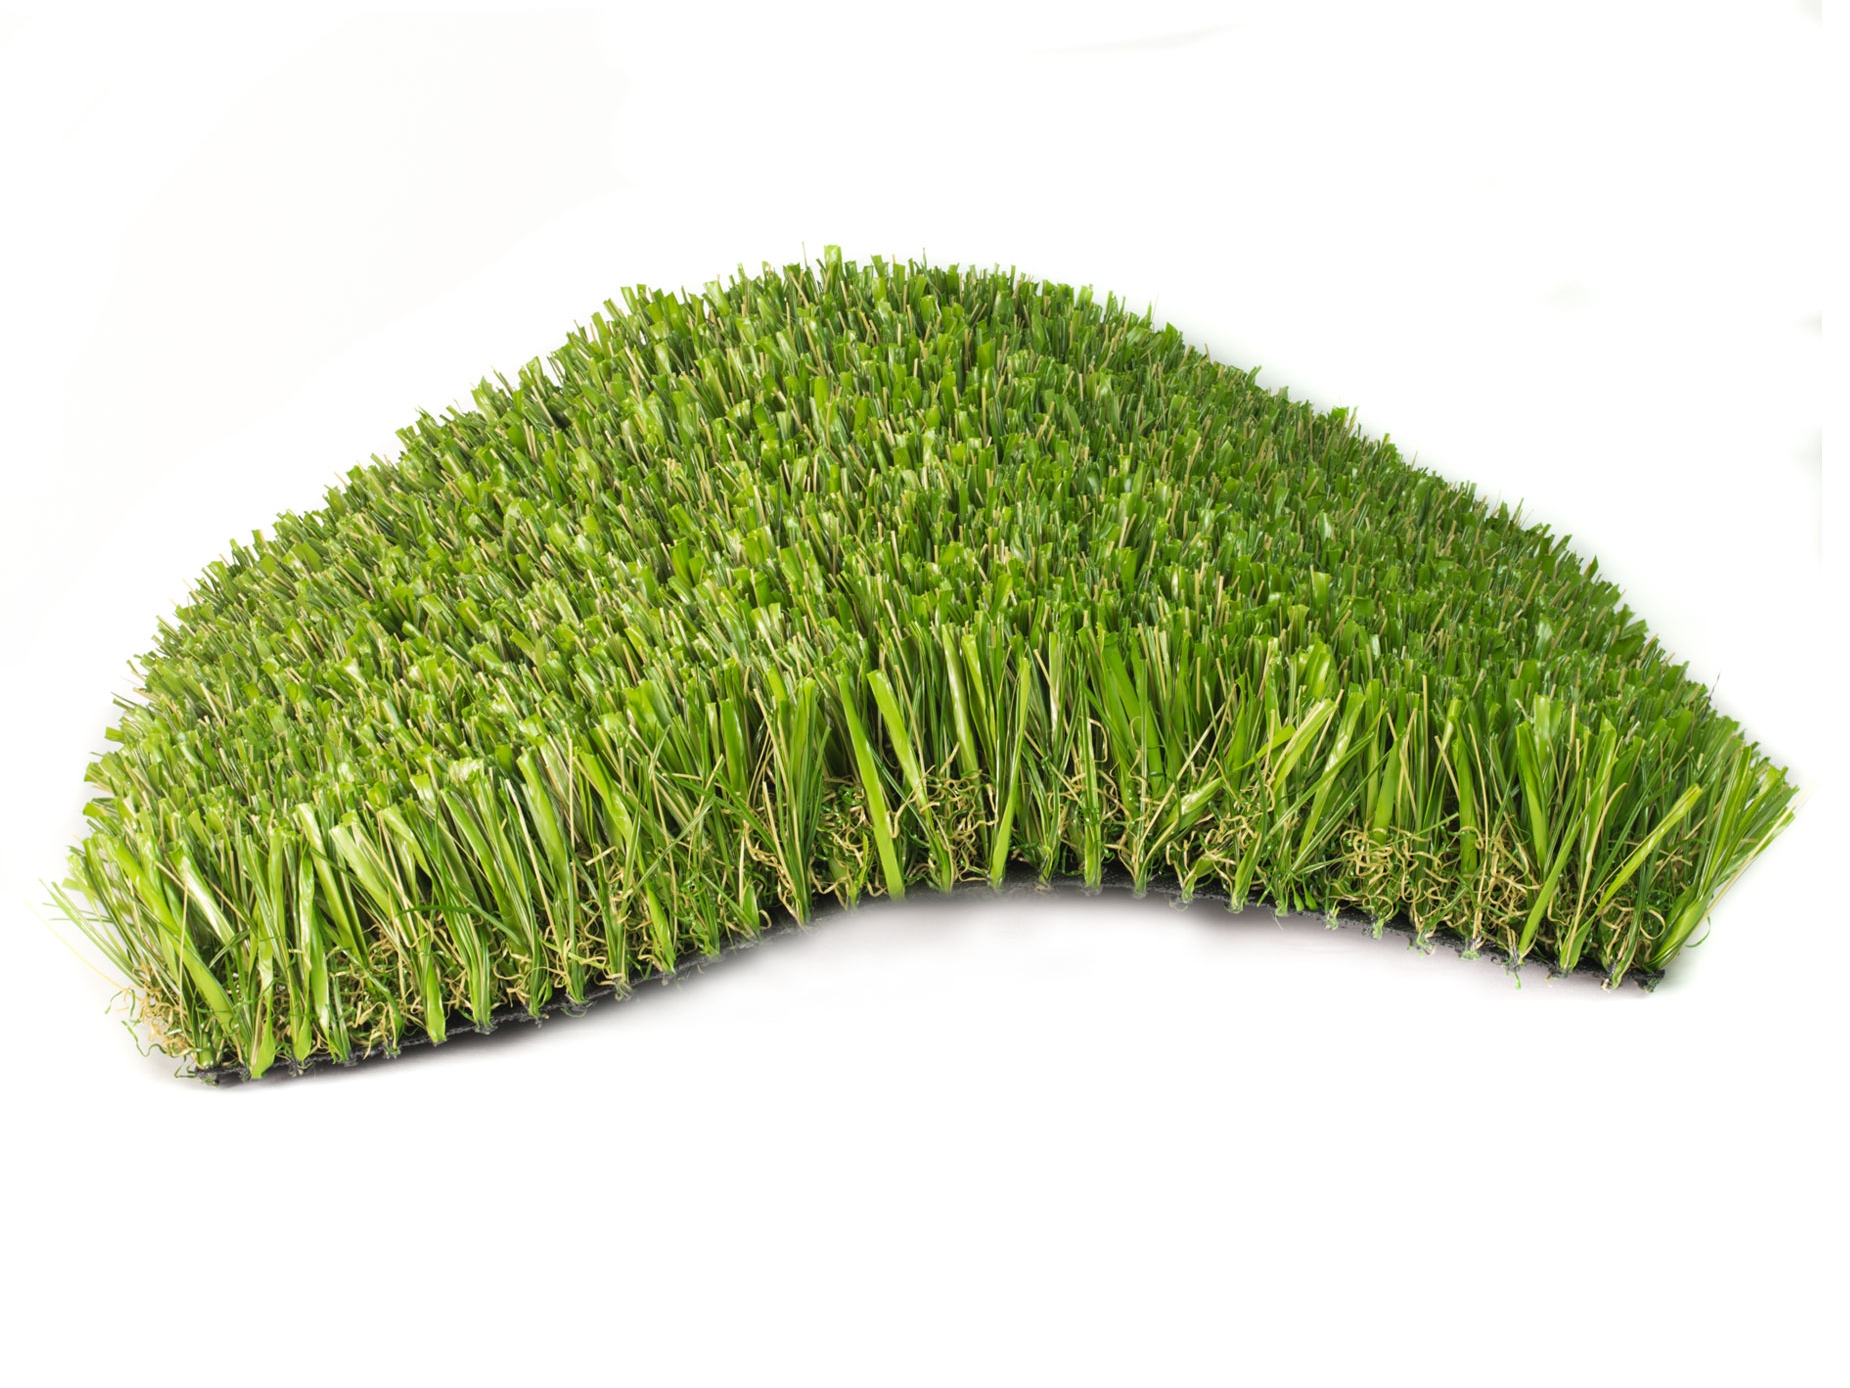 Ultra Real synthetic turf, GST artificial grass, fake turf, faux grass, sample